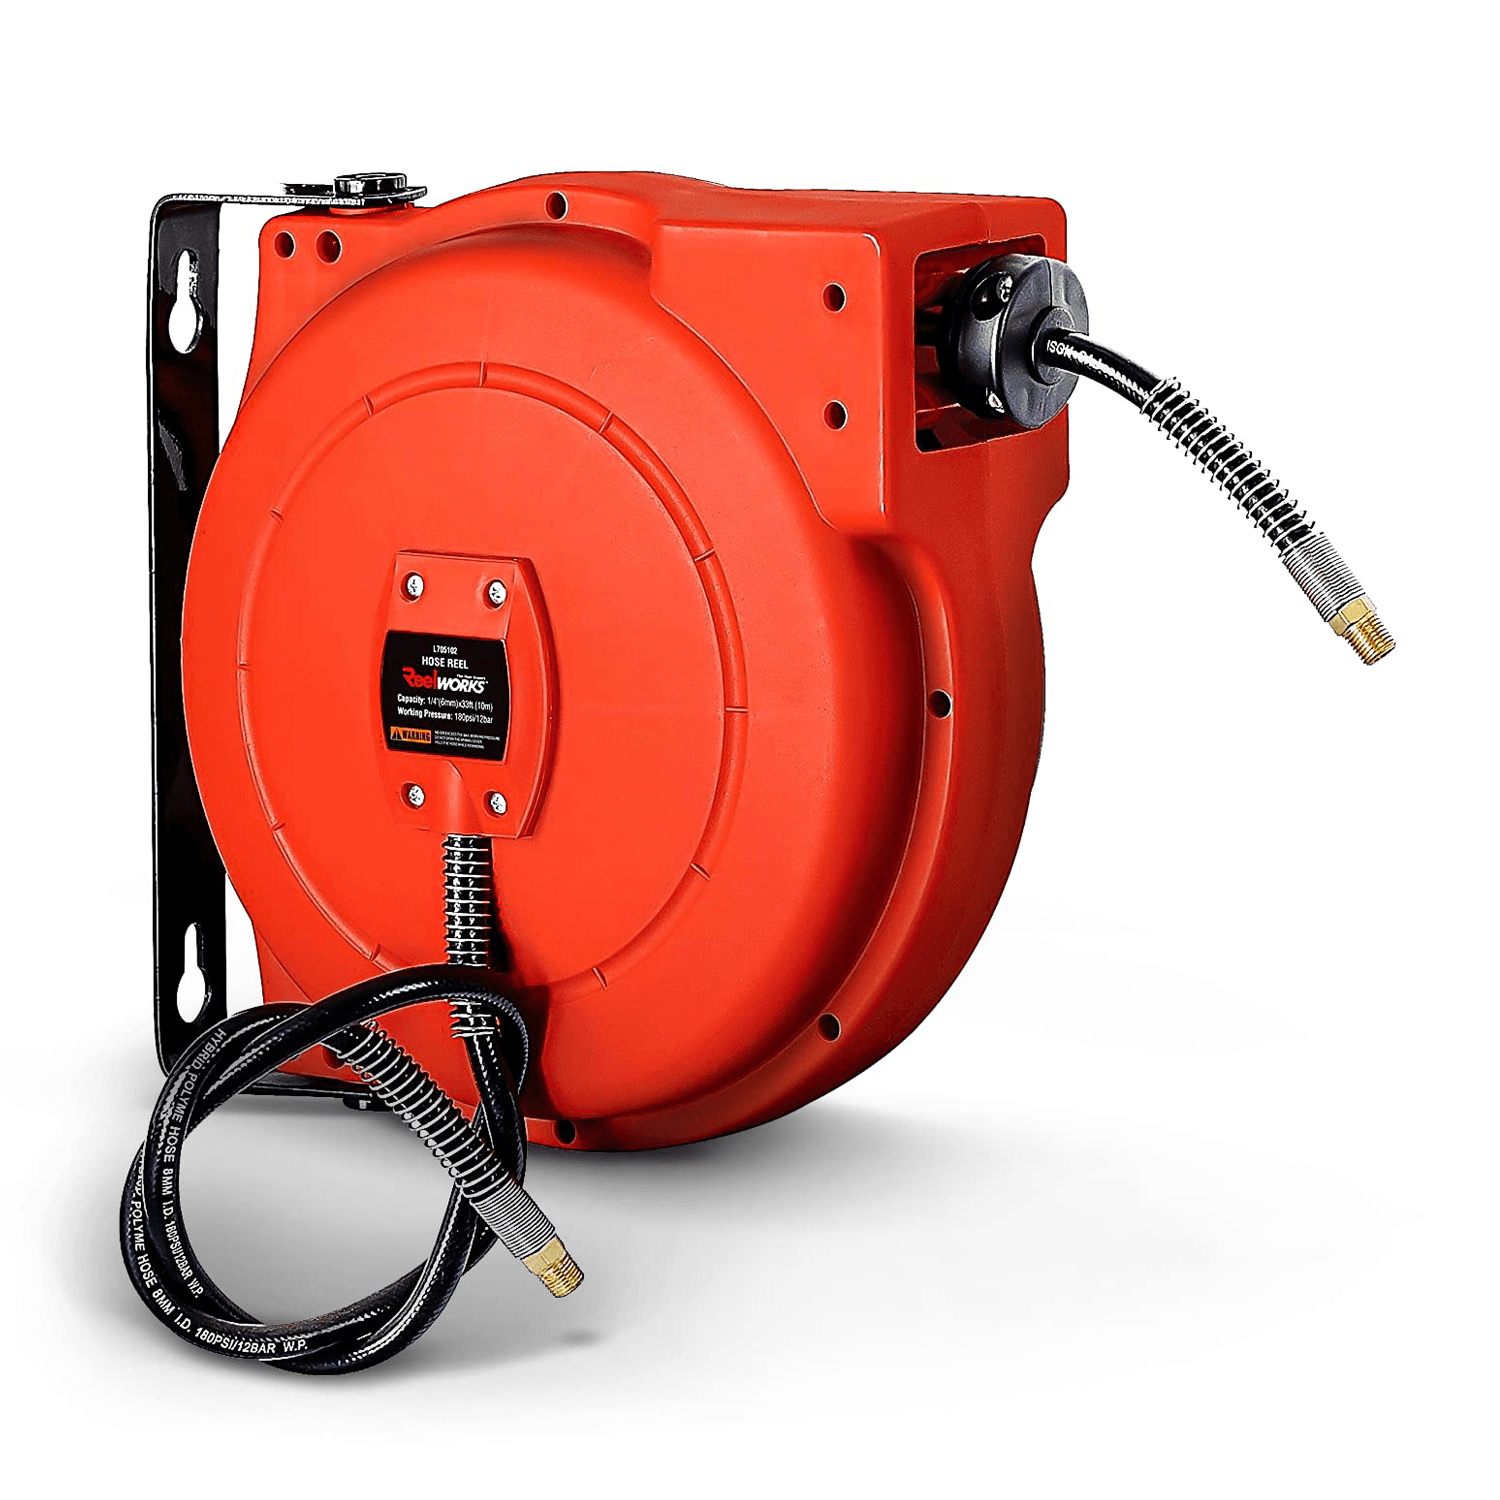 ReelWorks Mountable Retractable Air Hose Reel - 1/4" x 33'FT, 3' Ft Lead-In Hose, 1/4" NPT Connections - DIY Tools by GreatCircleUS